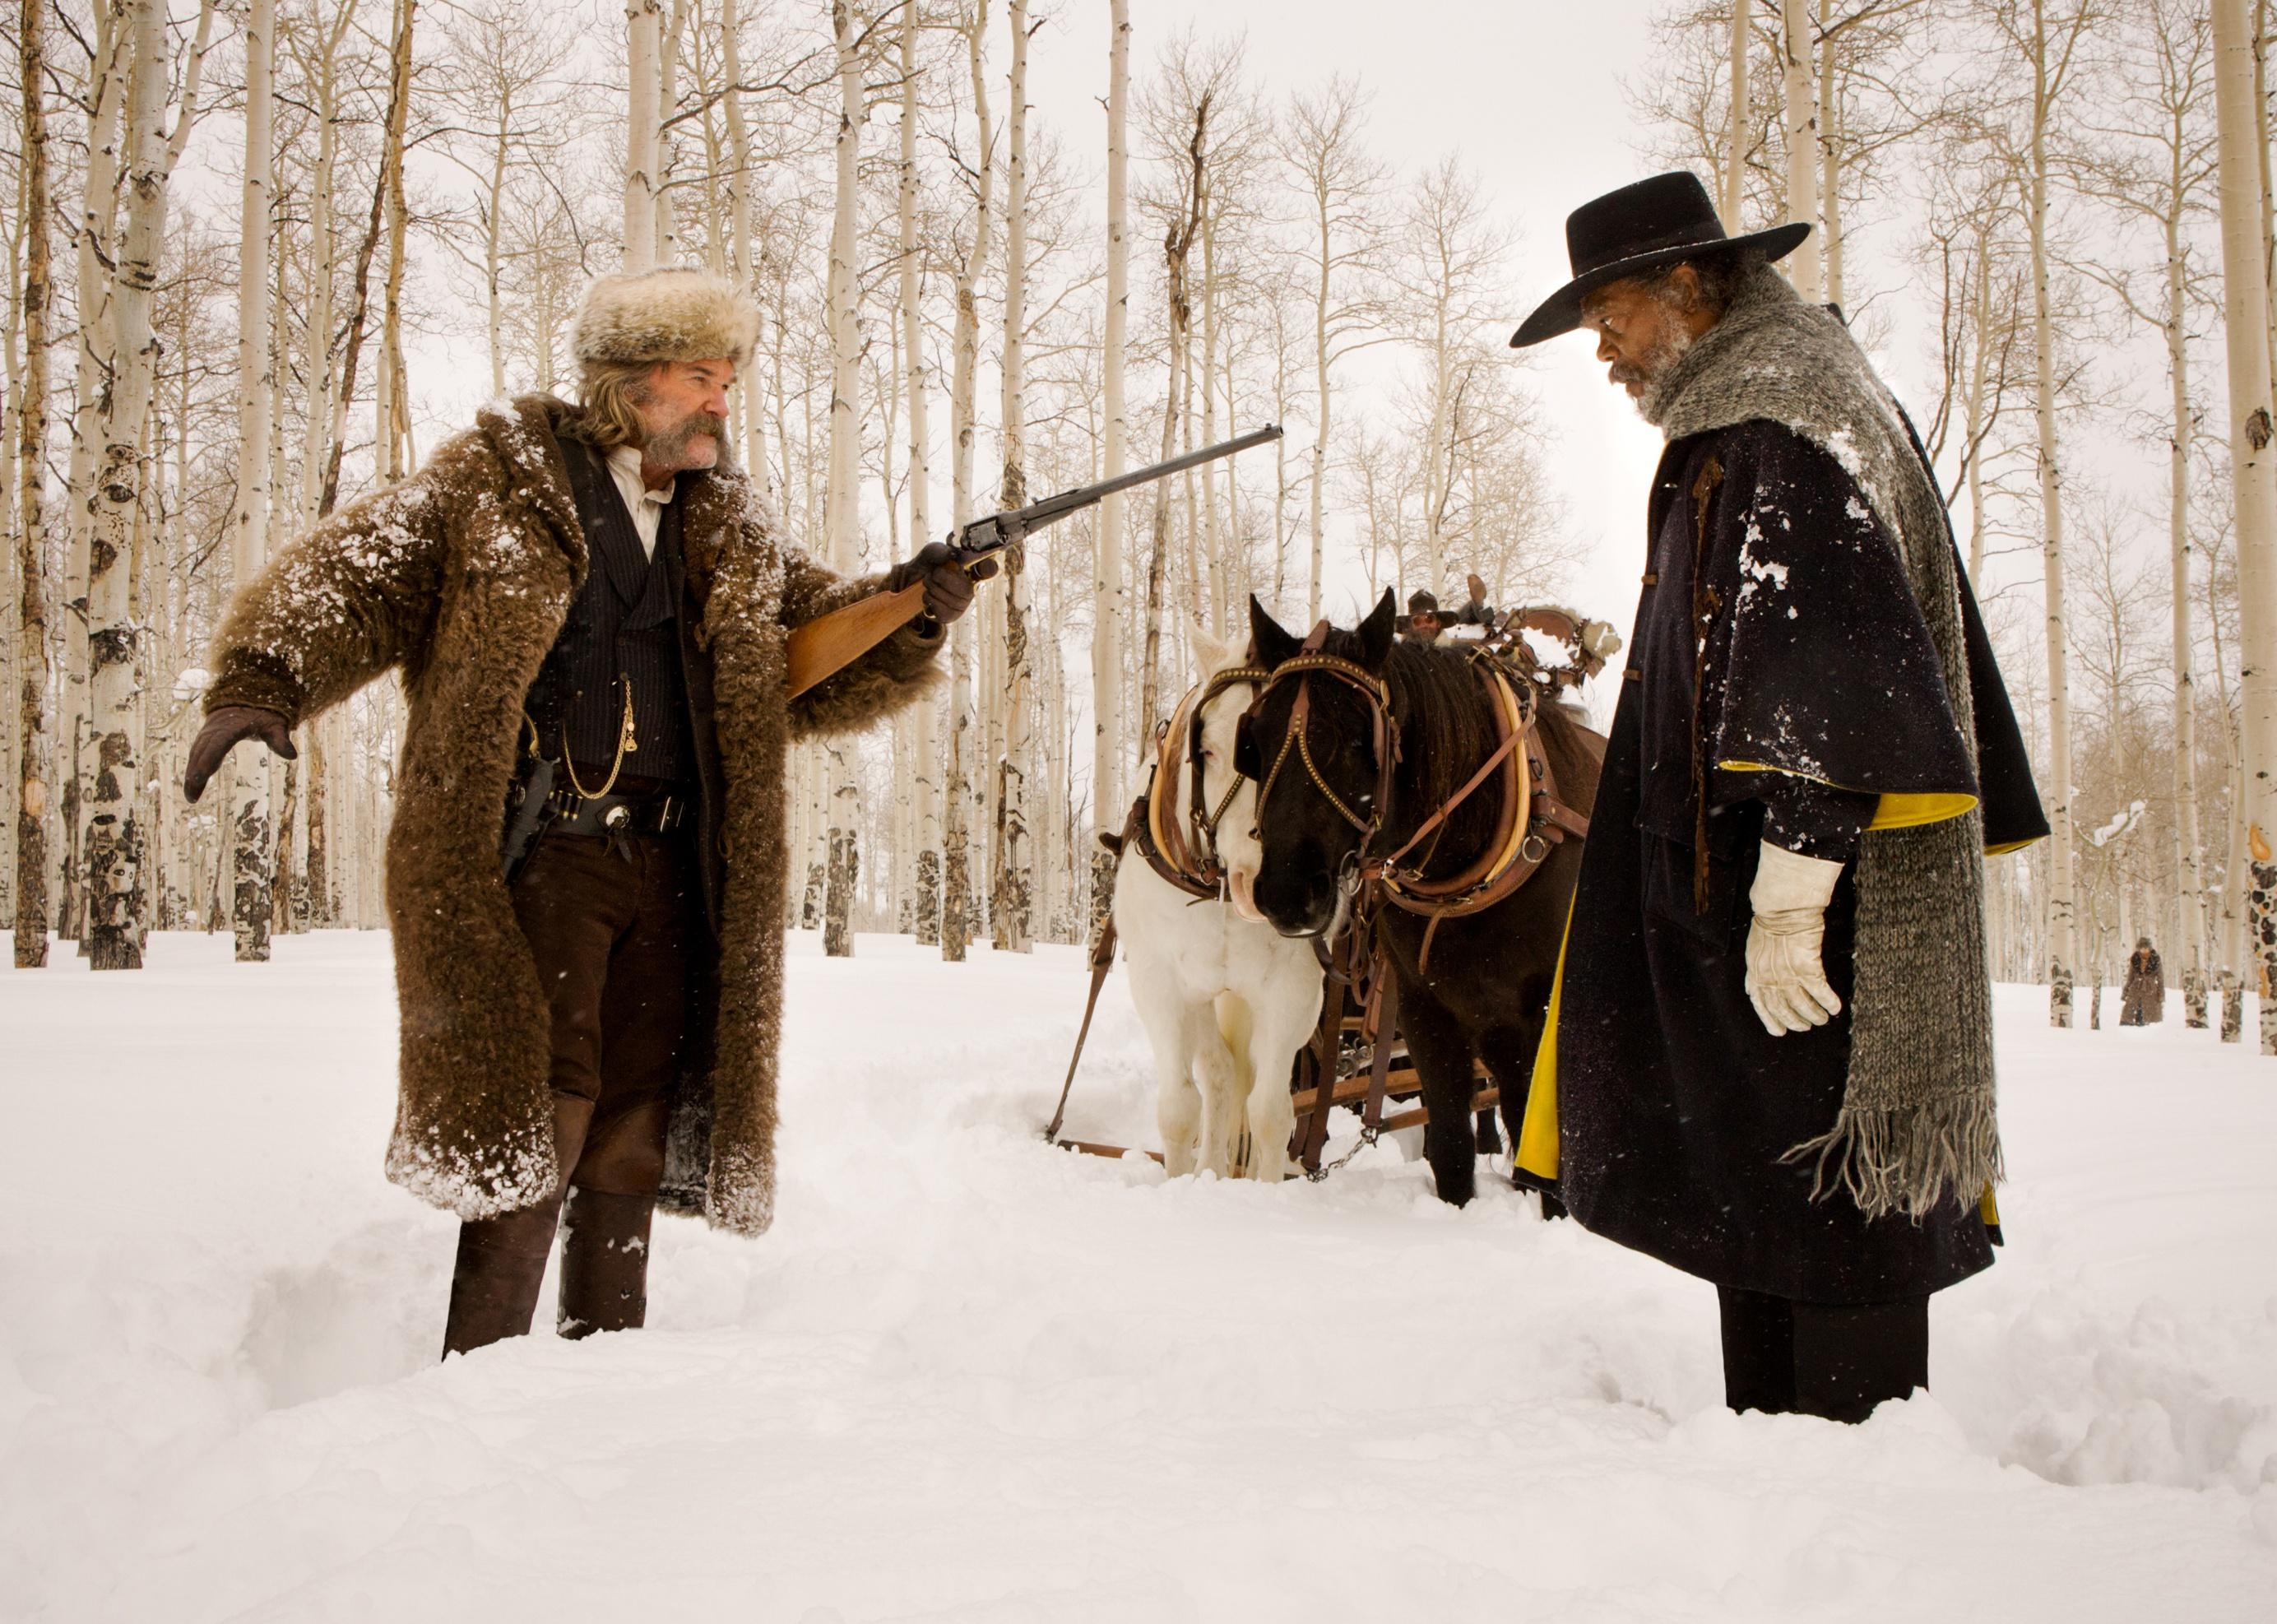 Kurt Russell points a long gun at Samuel L. Jackson with horses in the background in the snow.